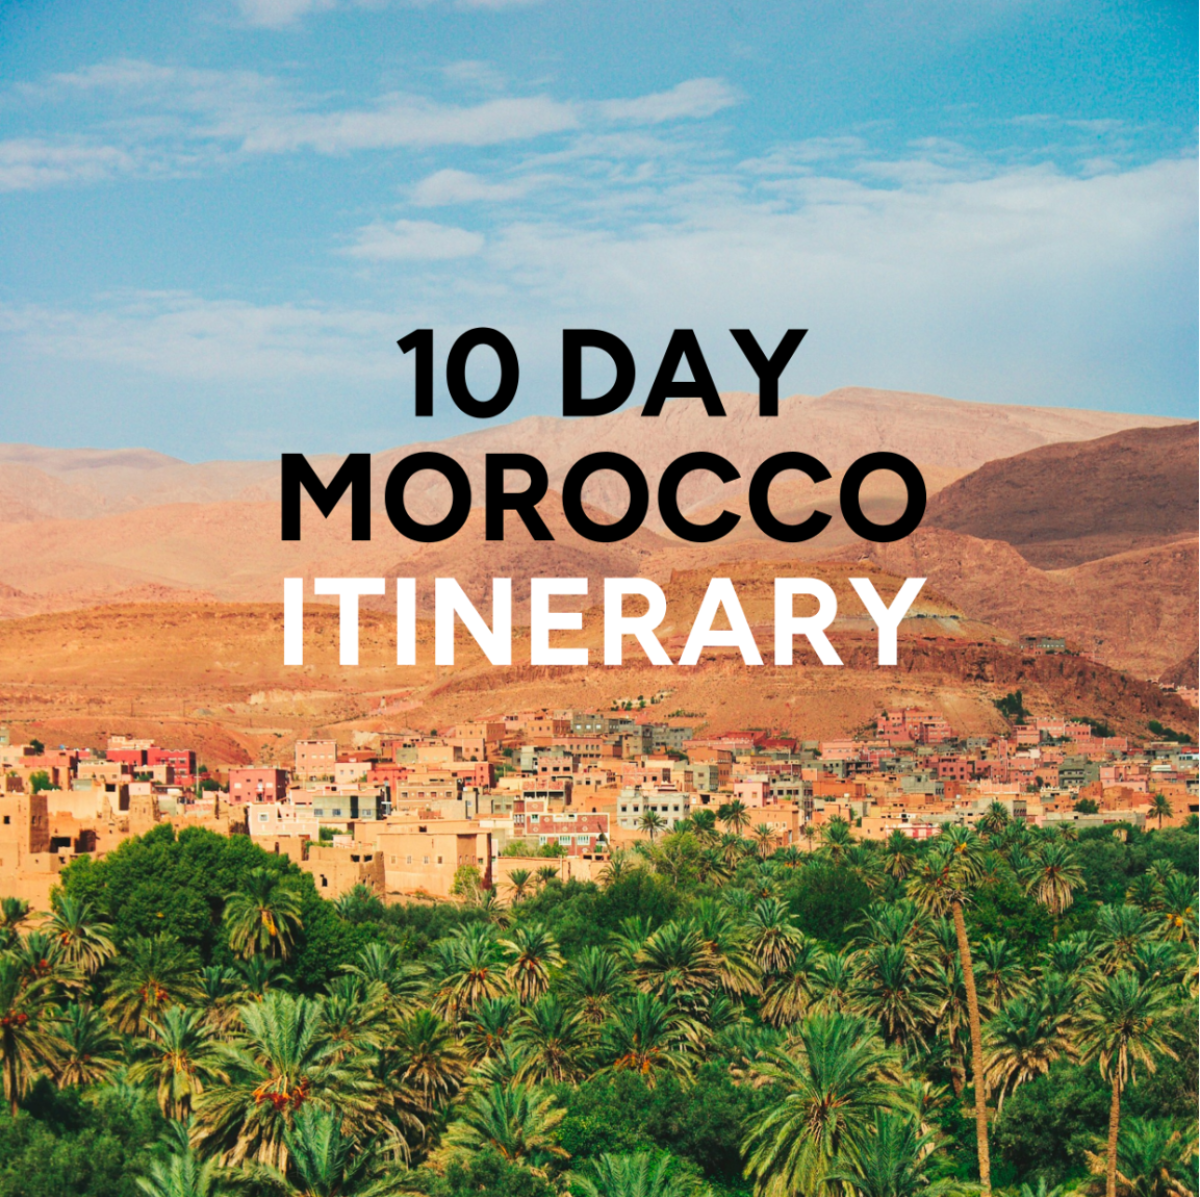 10 Day Morocco Itinerary Template